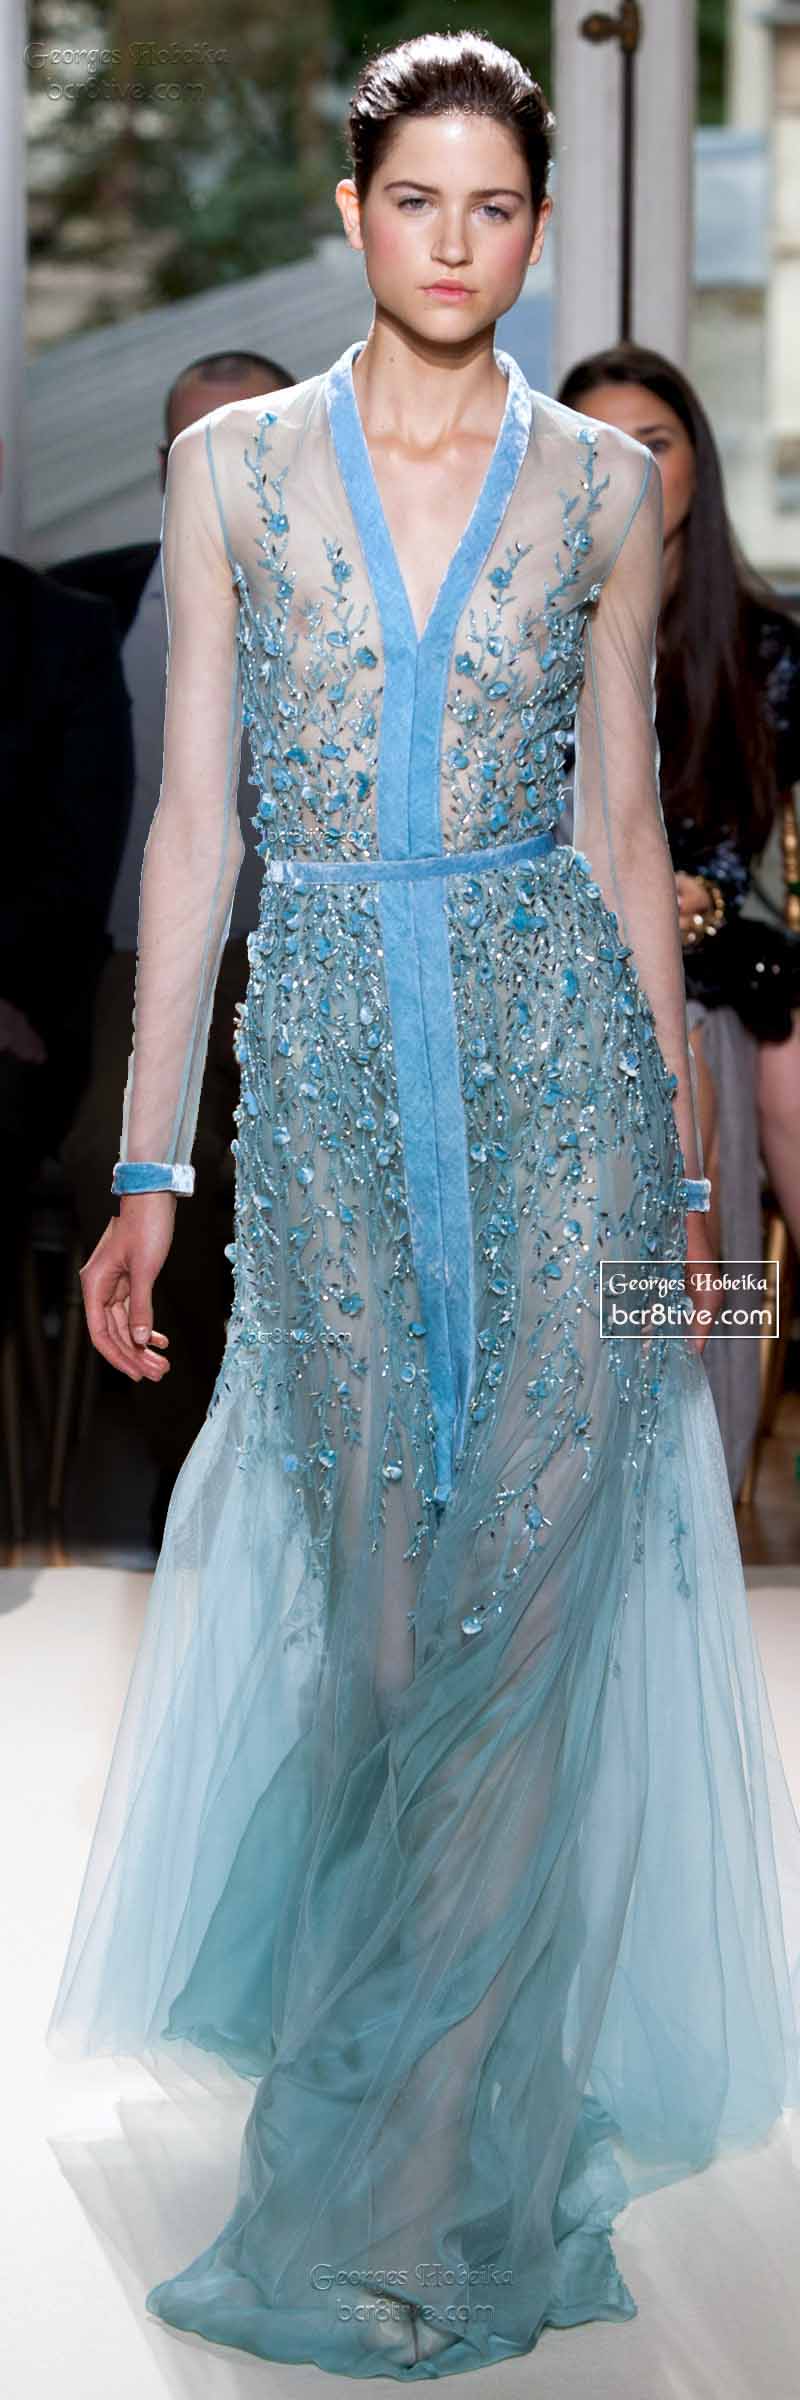 Georges Hobeika Fall Winter 2012-13 Couture